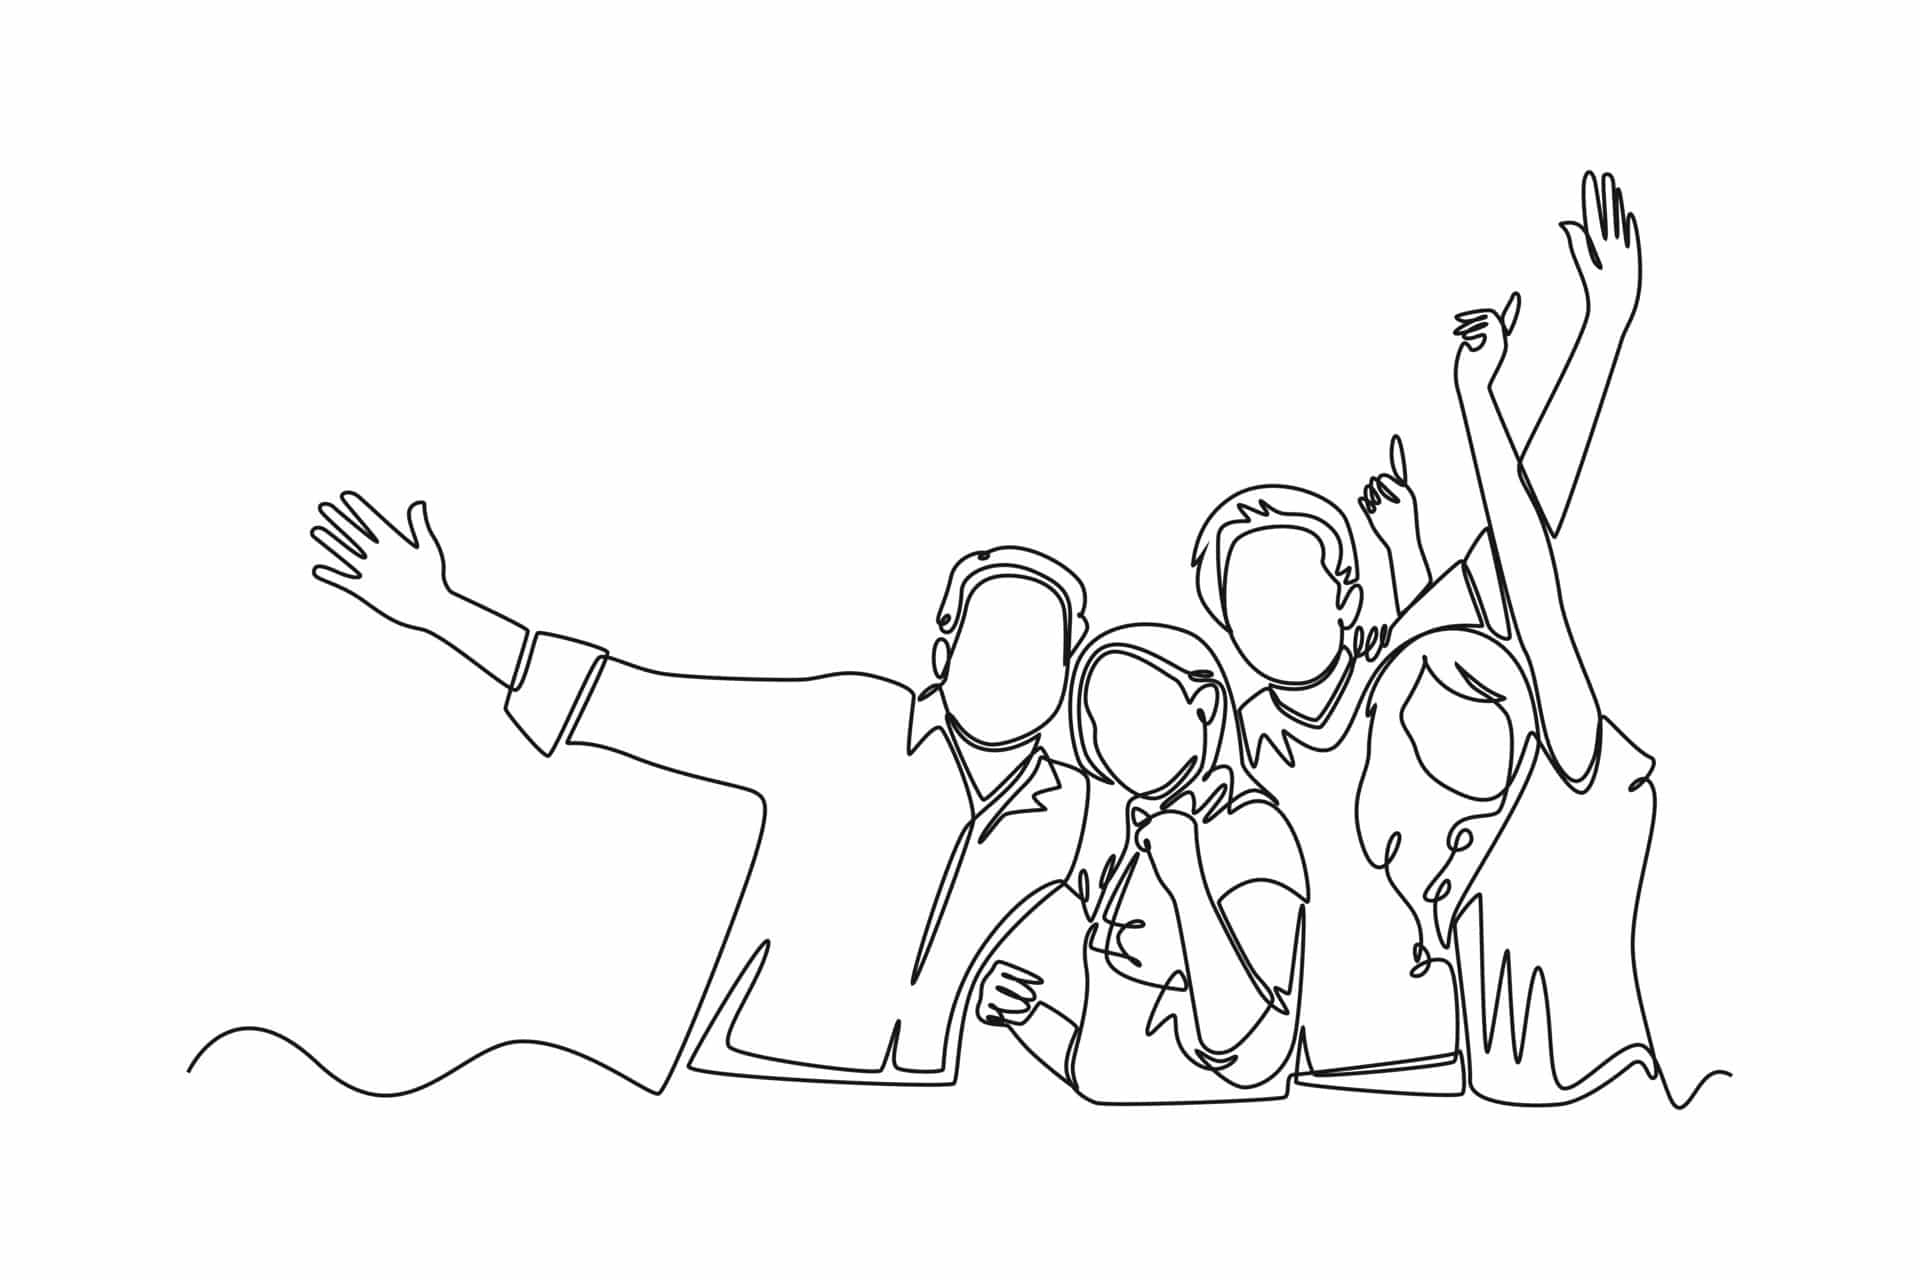 vecteezy_continuous-one-line-drawing-of-happy-people-group-welcoming_26741945